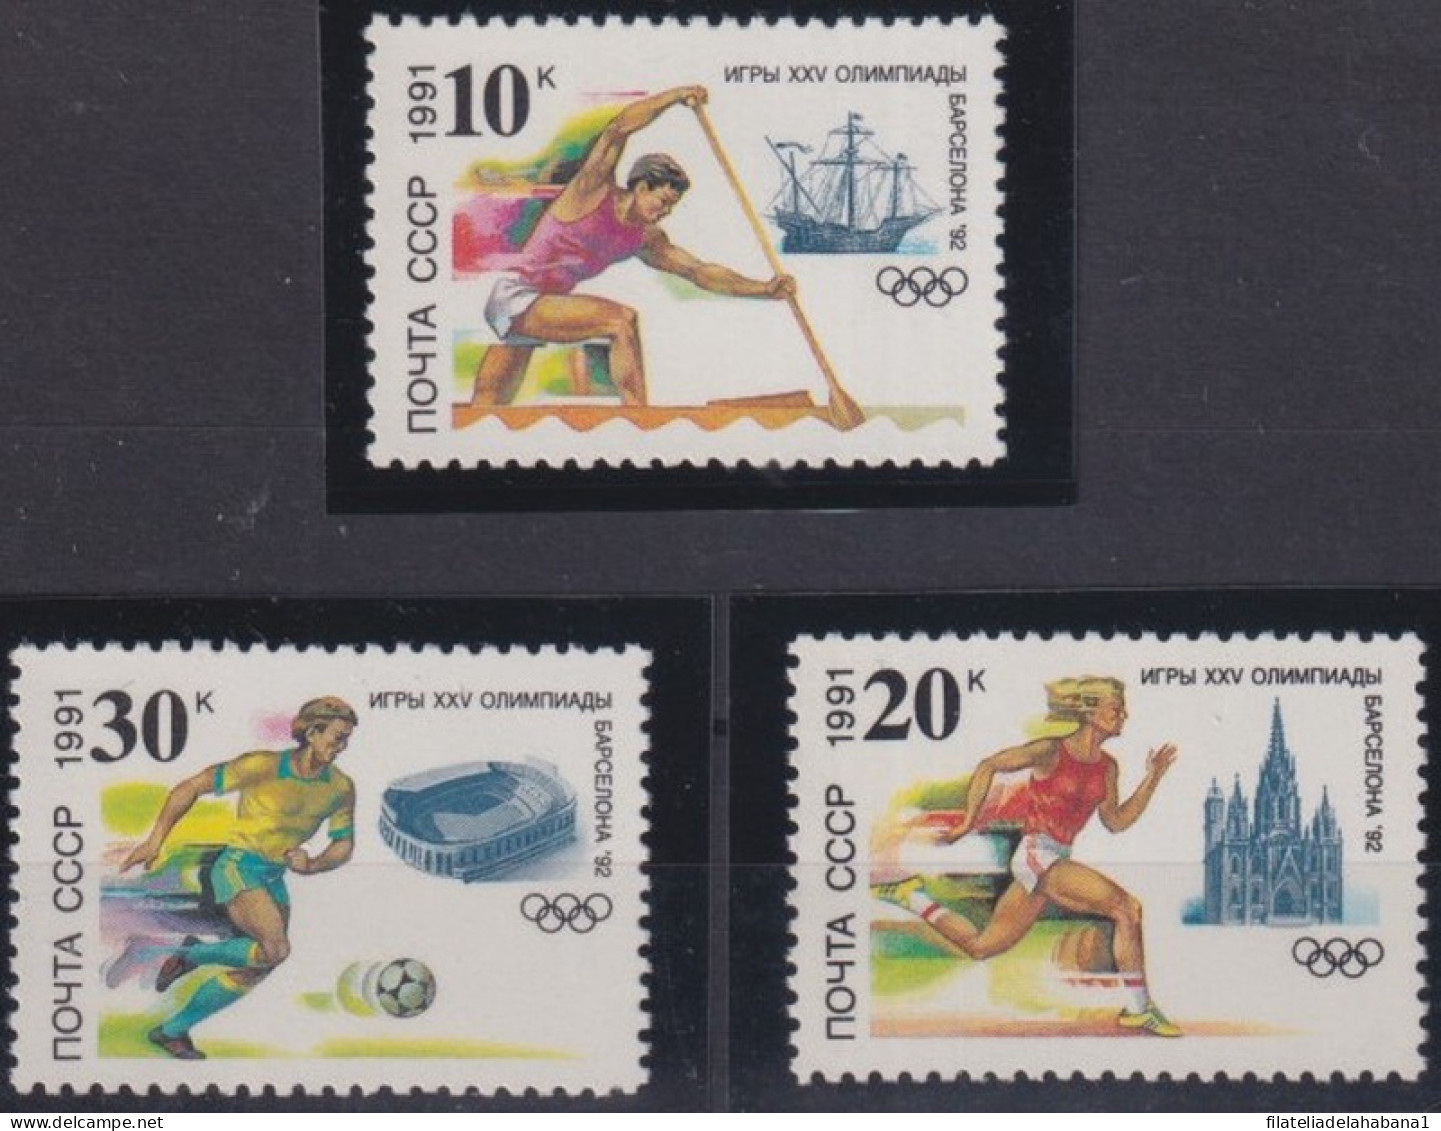 F-EX48927 RUSSIA 1991 MNH BARCELONA OLYMPIC GAMES ATHLETISM SOCCER.  - Zomer 1992: Barcelona